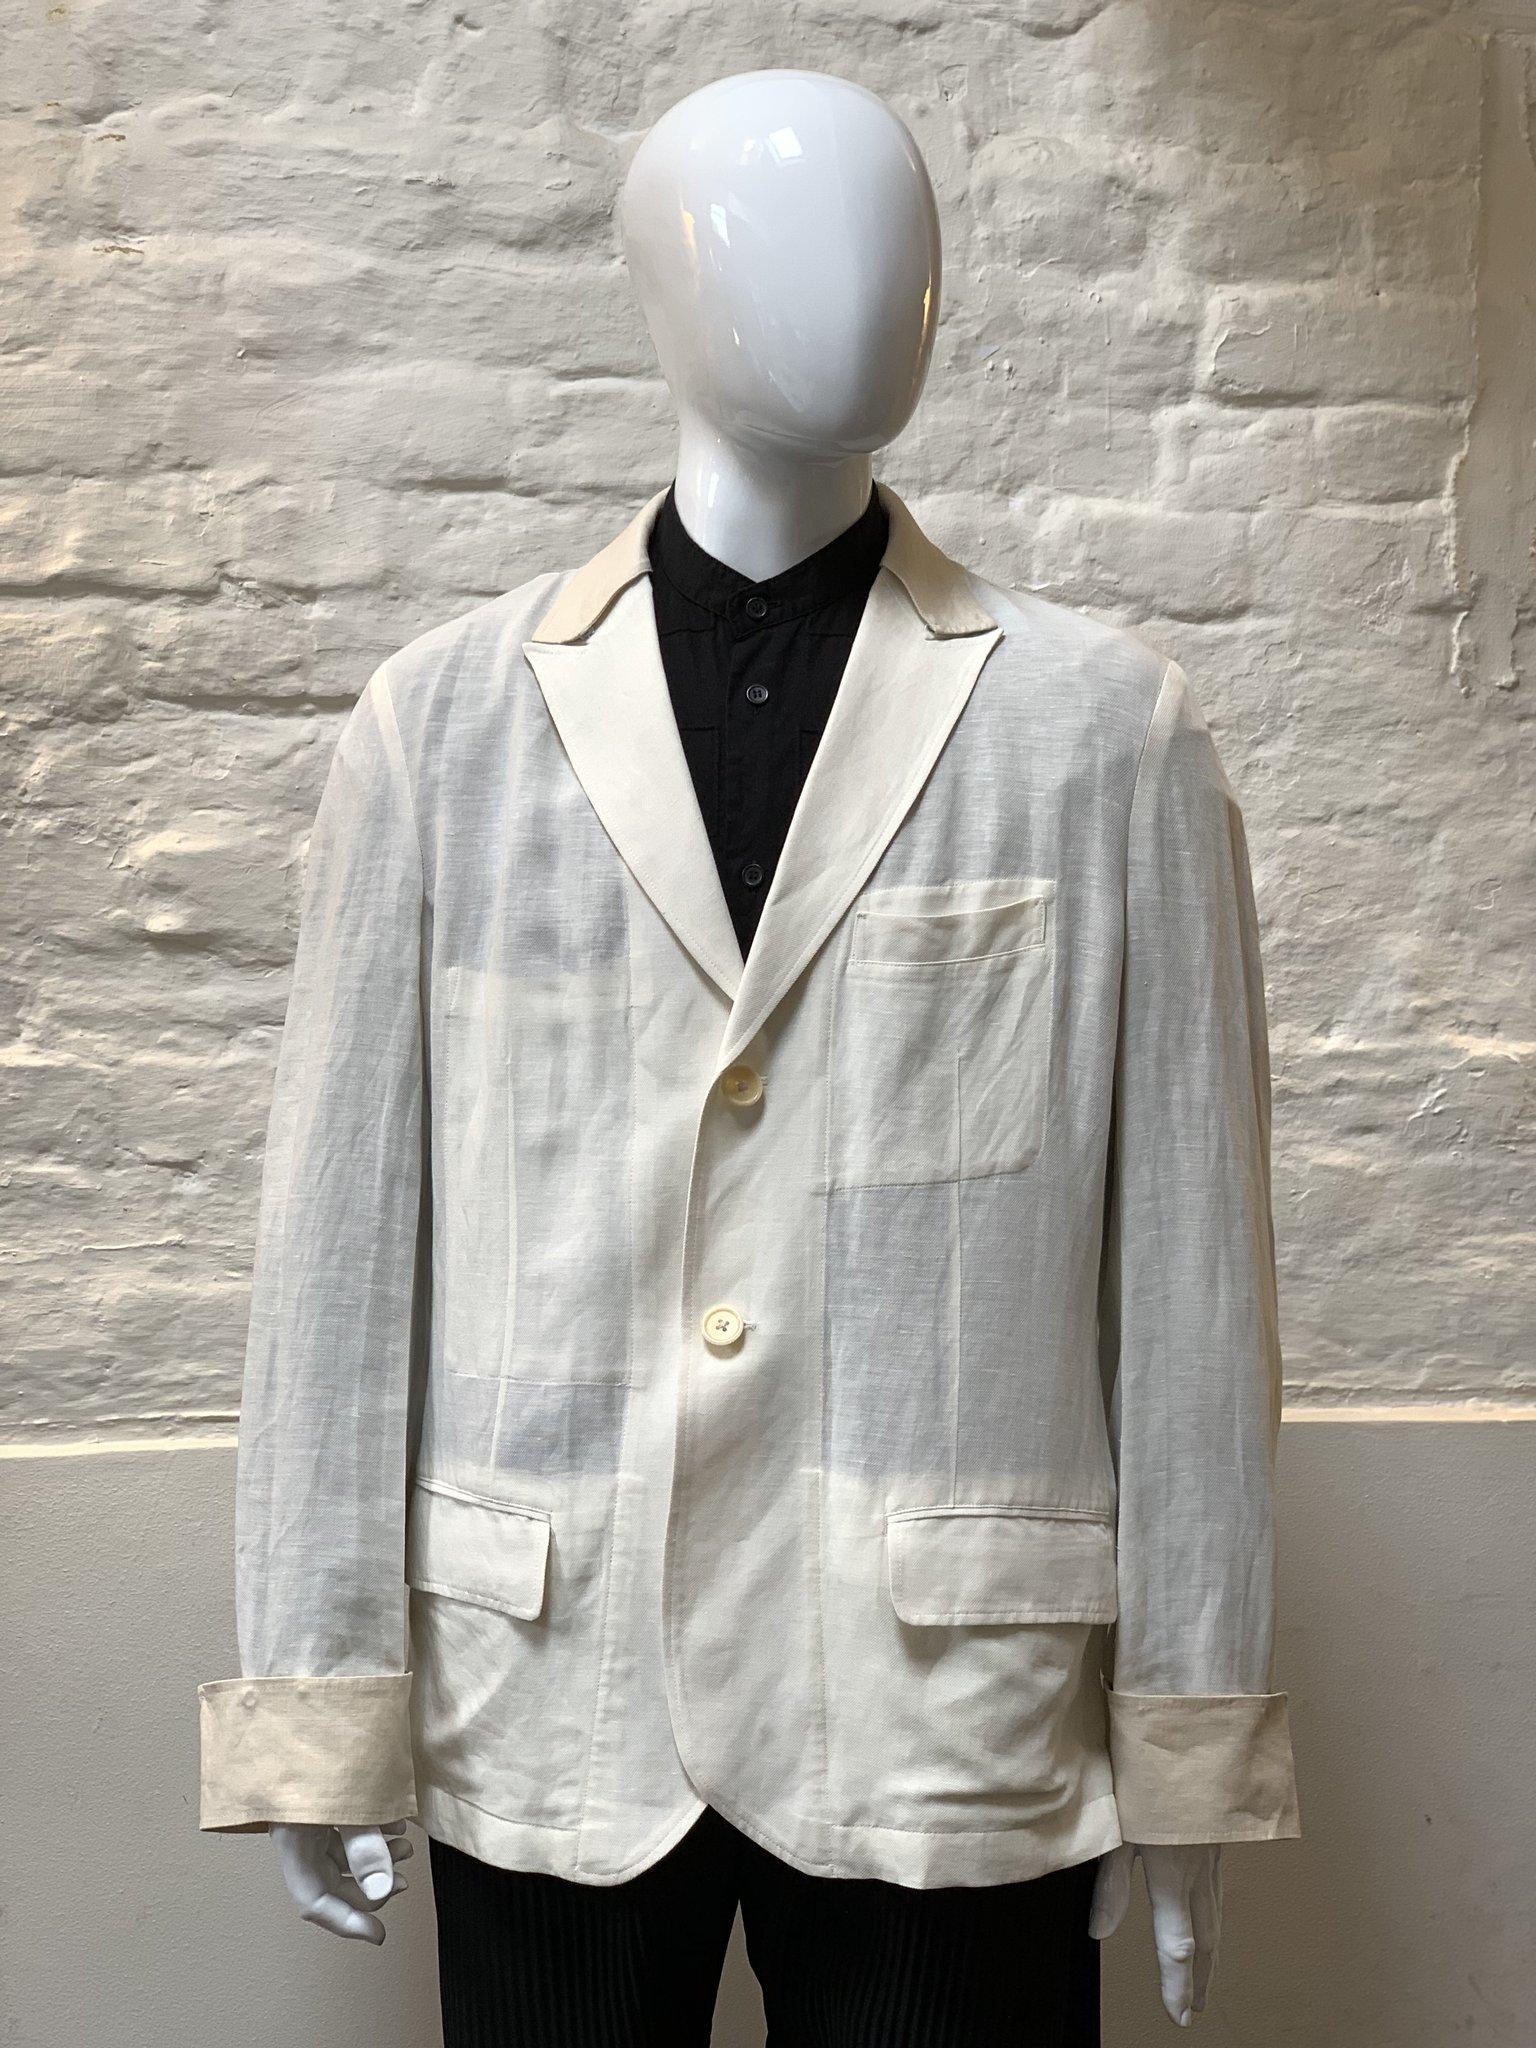 Yohji Yamamoto White Linen Jacket made in Japan from linen. 

Yohji Yamamoto is known for the avant-garde spirit of his clothing. His signature oversized silhouettes in black often feature drapery in varying textures. Since the establishment of Y's